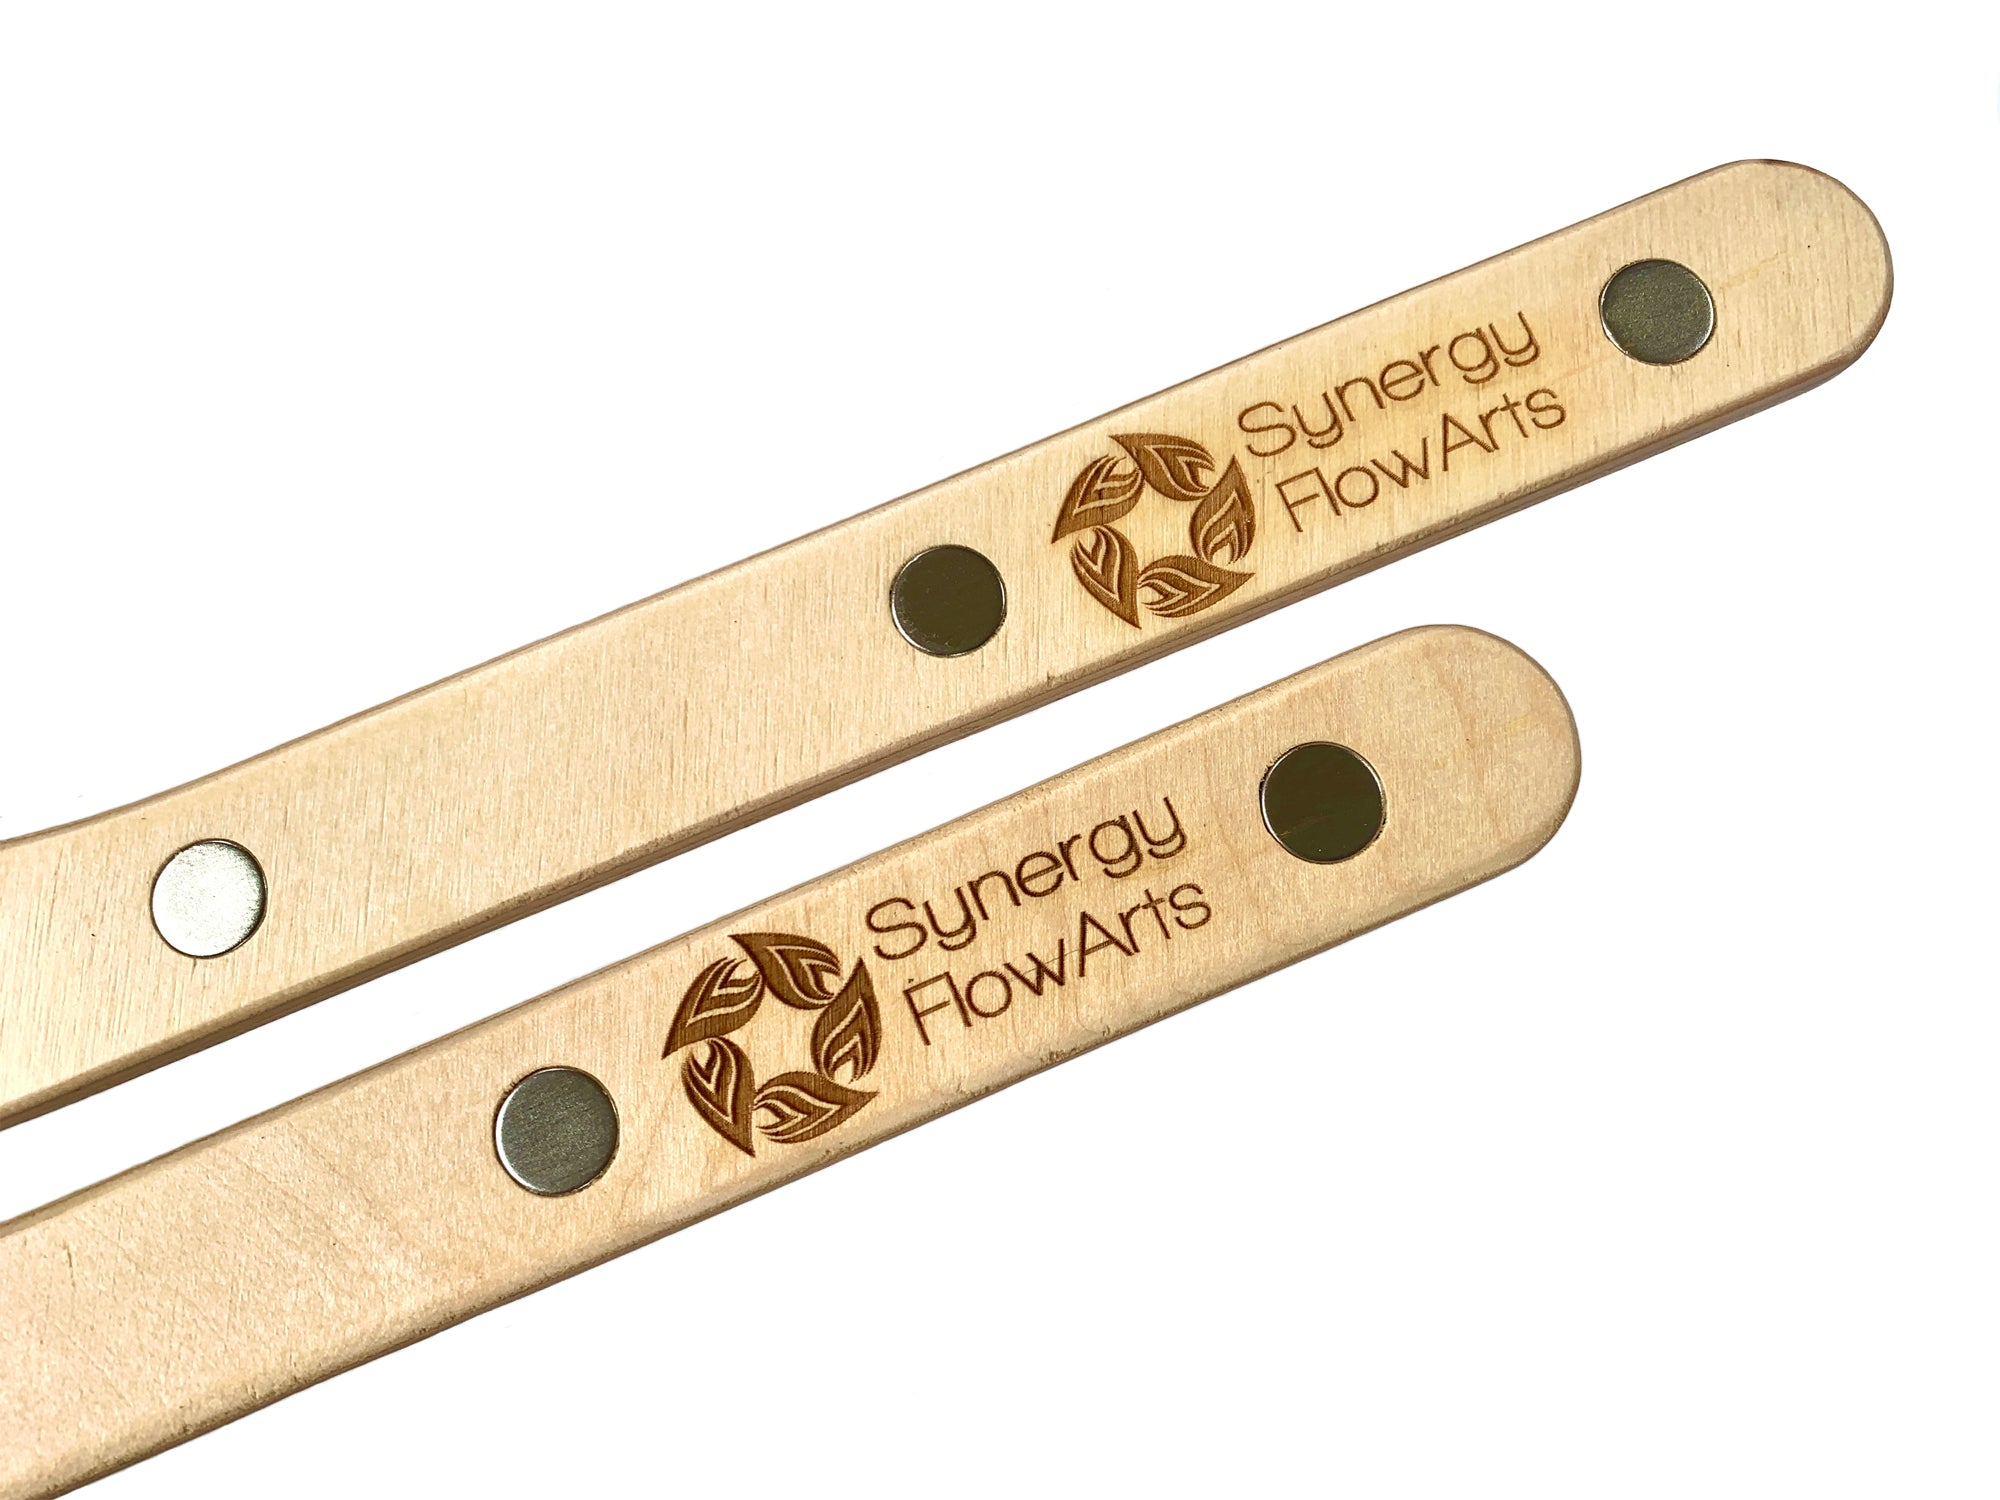 Our handcrafted and laser-engraved buugeng are made from ultra-sturdy 7-ply White Birch, hand-sanded and sealed with Vermont Natural Coatings. A beautiful flow prop you won't find anywhere else!